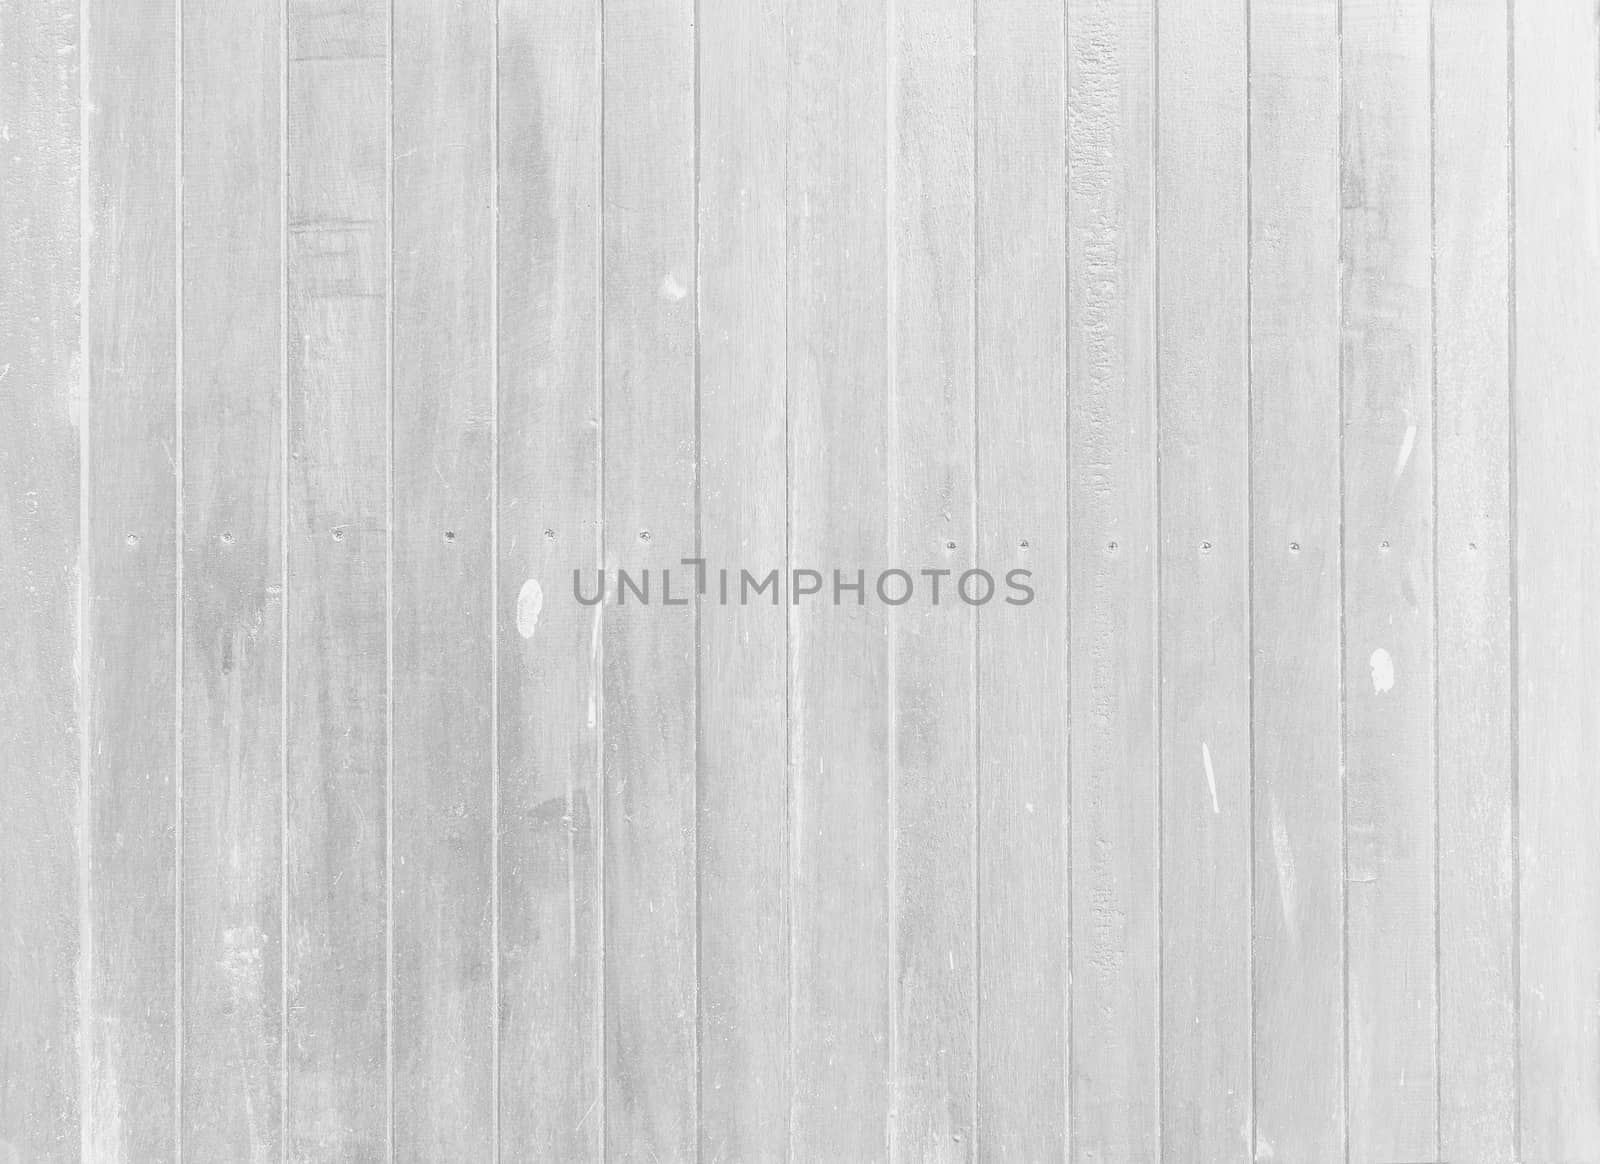 White wooden texture for background design